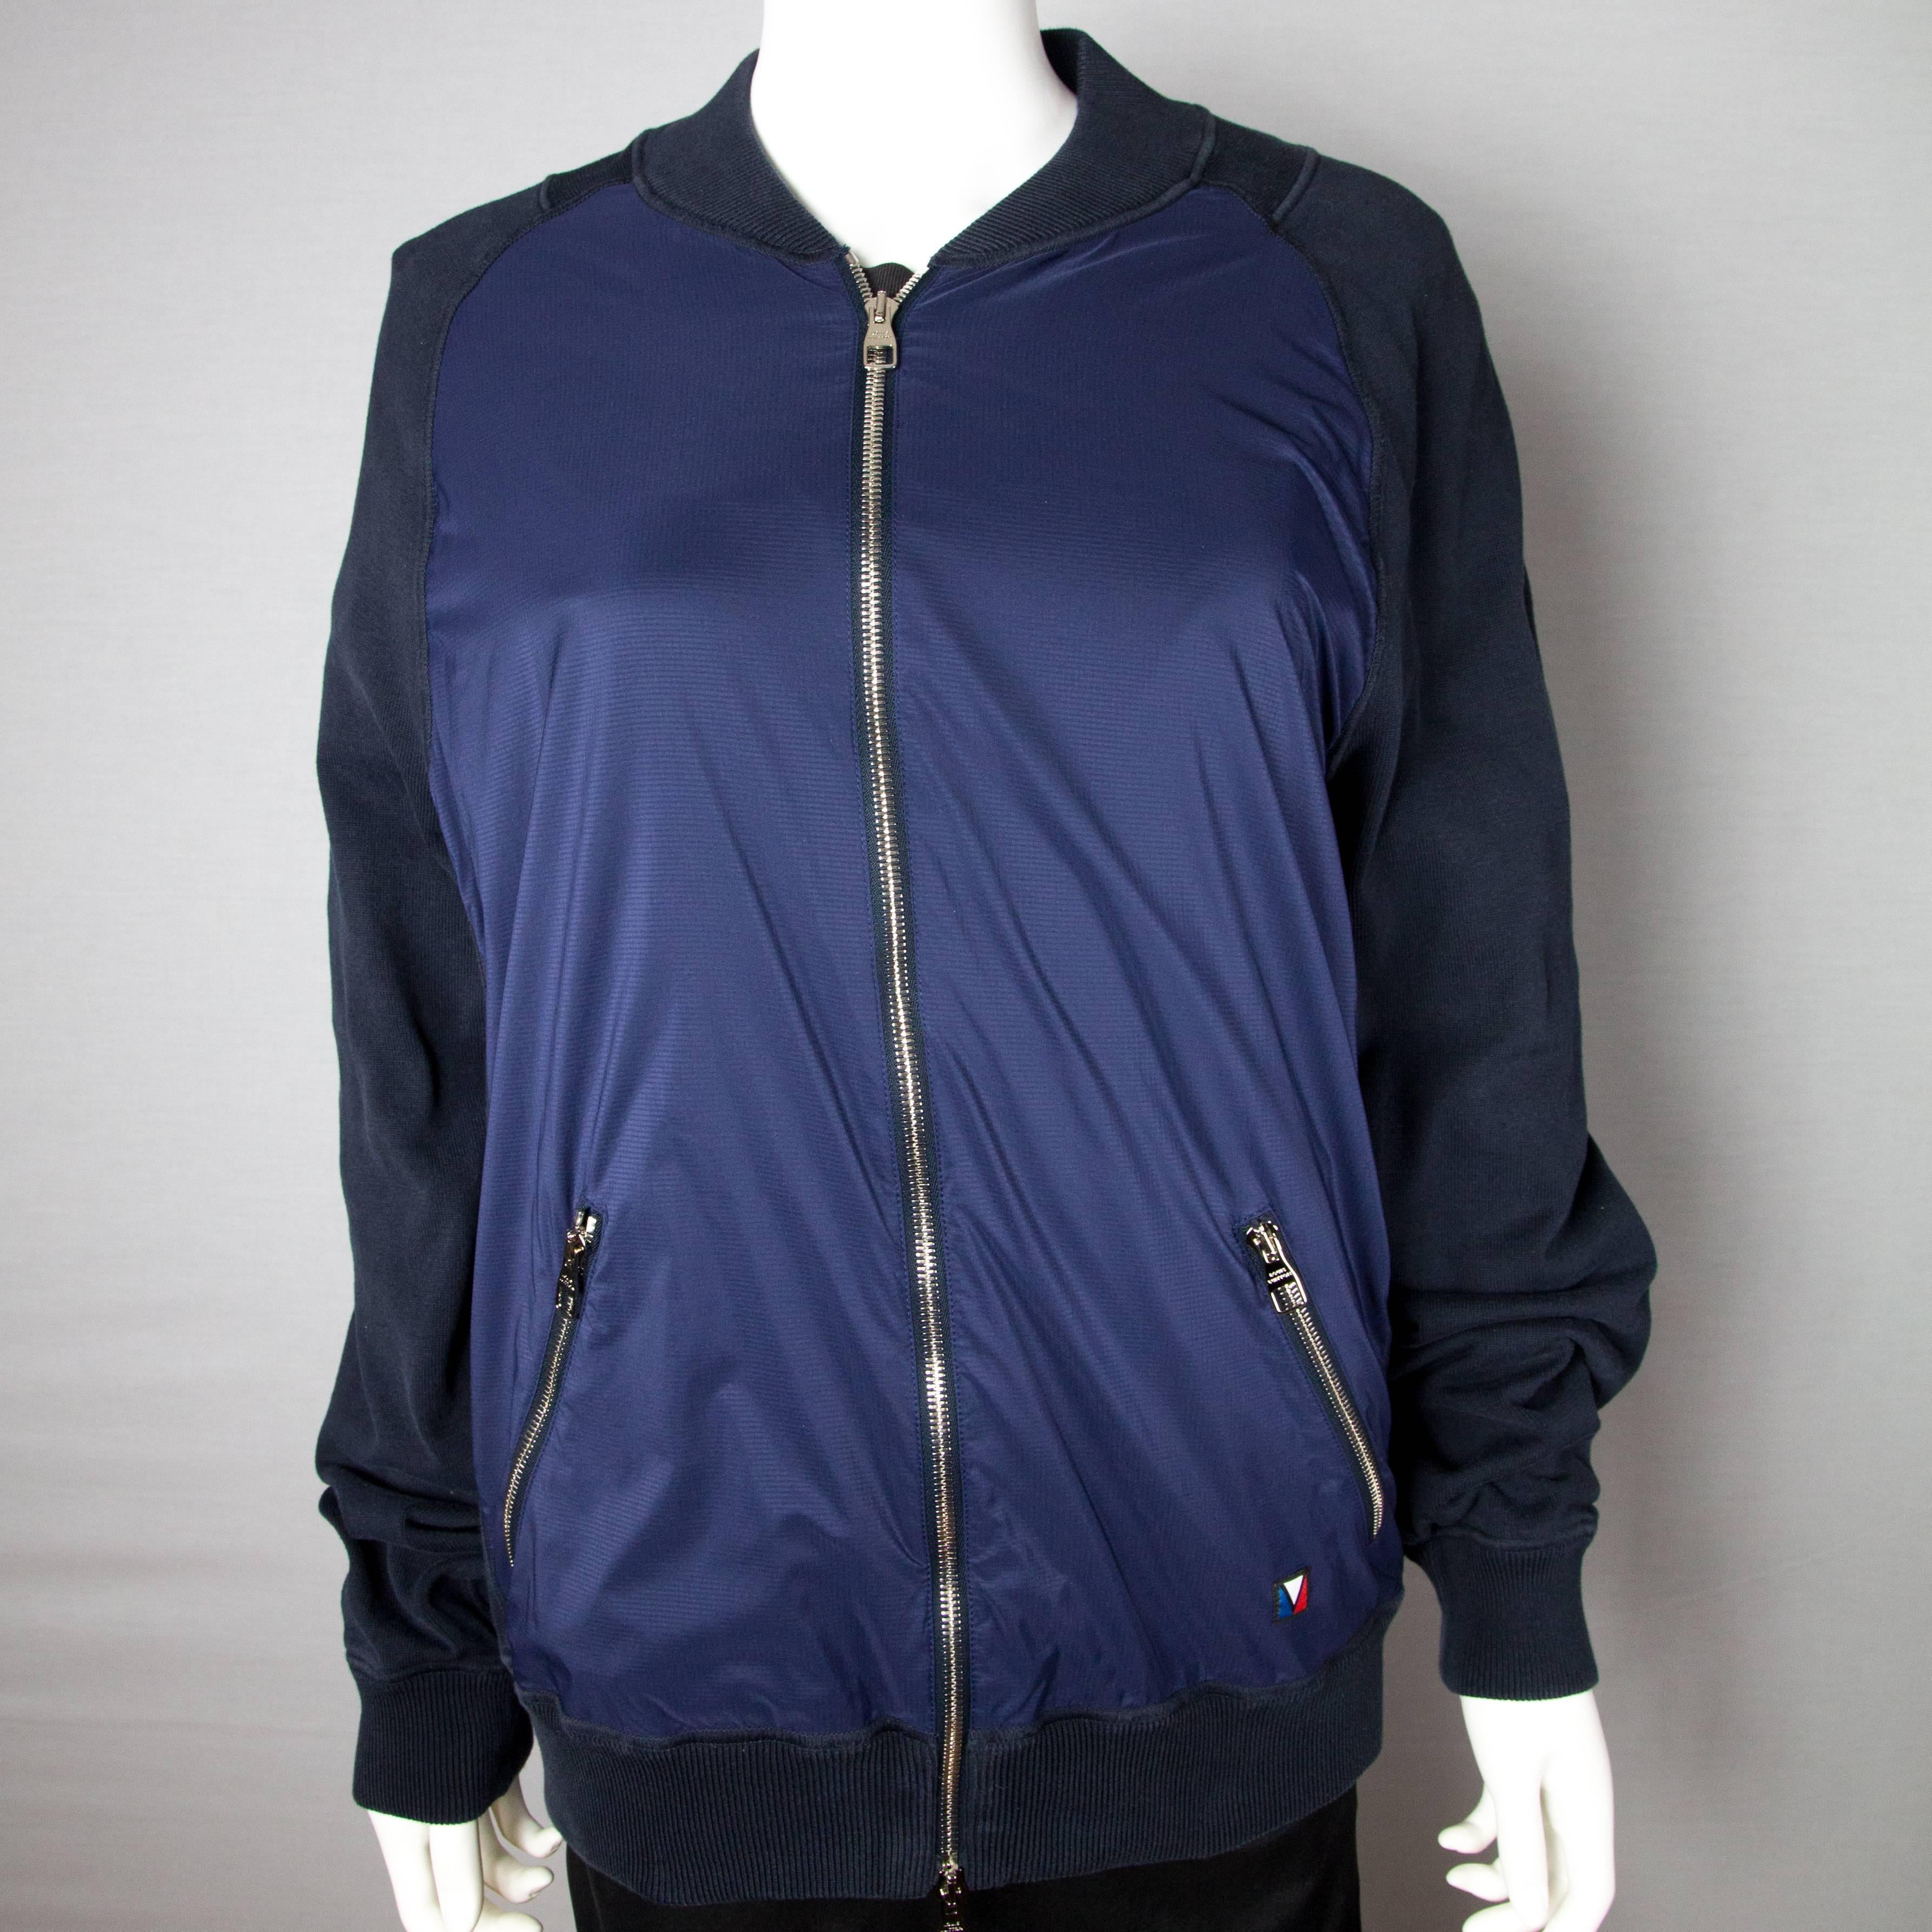 Louis Vuitton - America's Cup Bomber Jacket

Size: Large (Fits Slim)

Color: Blue

Material: 93% Cotton - 7% Polyamide

------------------------------------------------------------

Details:

- contrasting blue sleeves

- dual side zip